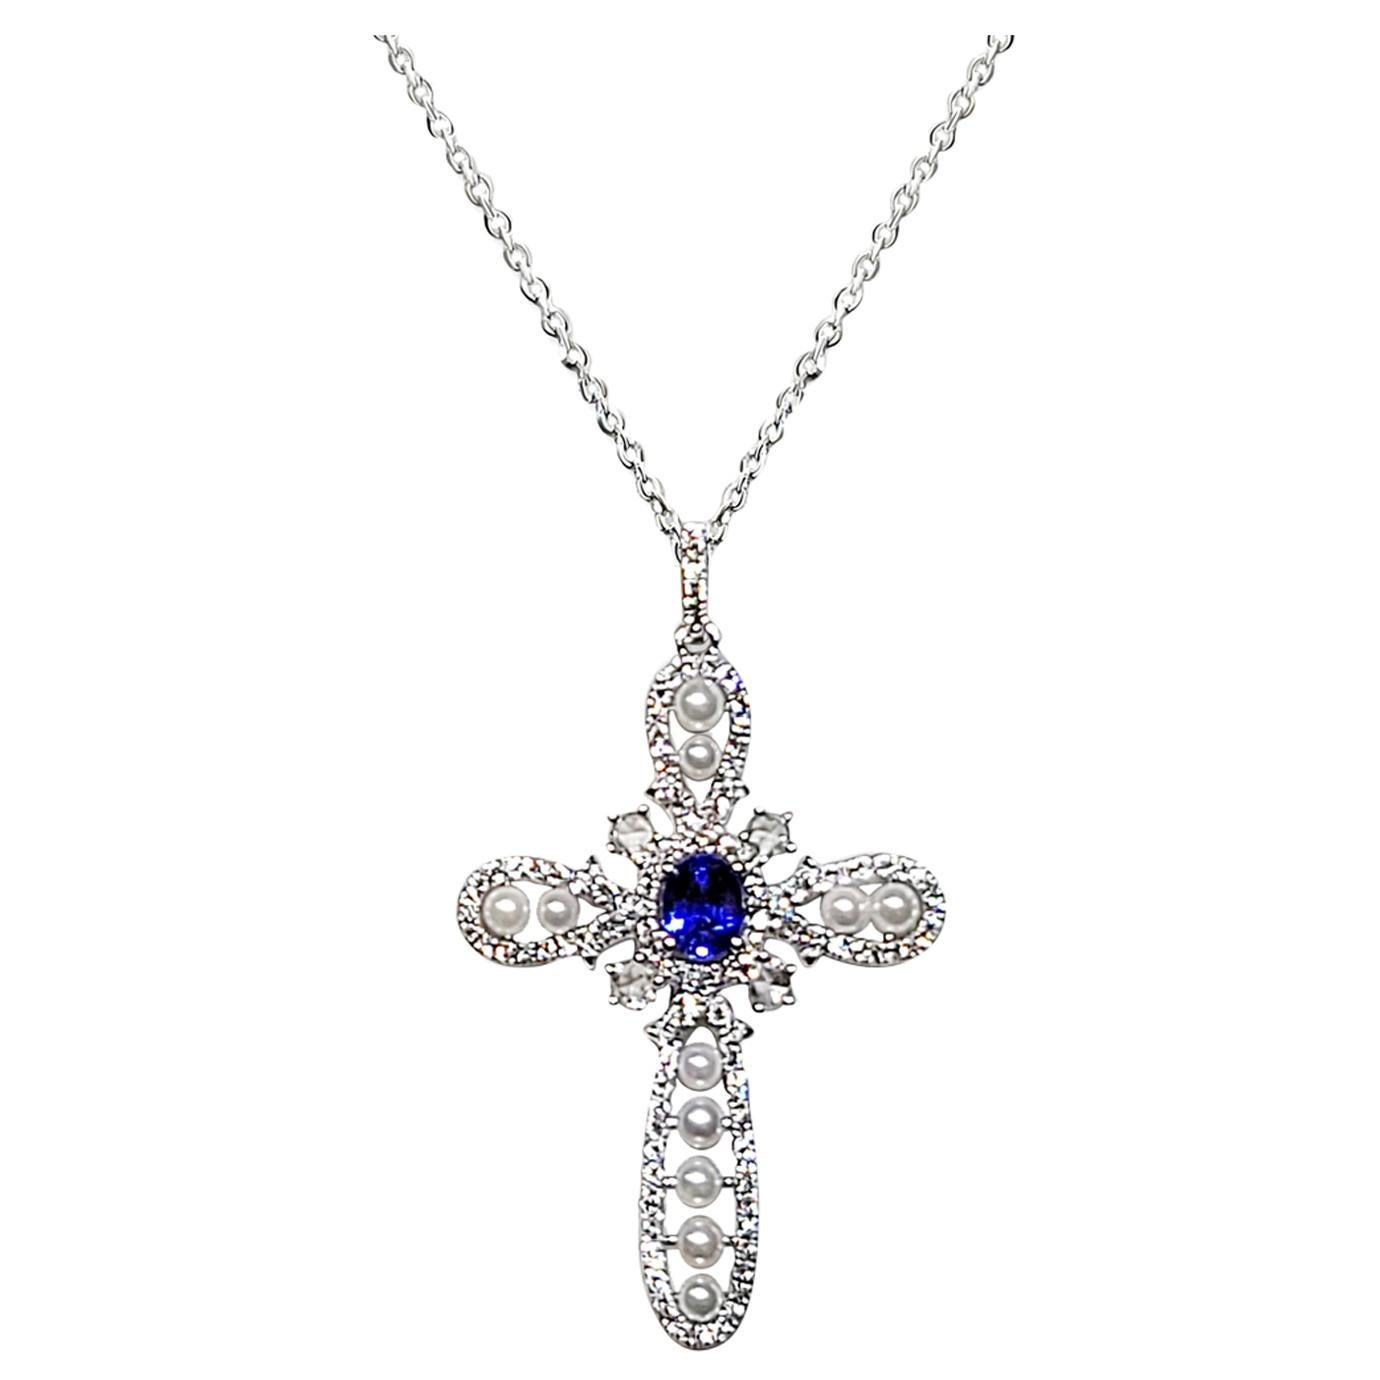 18 Karat White Gold 1.03 Carat Sapphire Pearl and Diamond Pendant with Chain